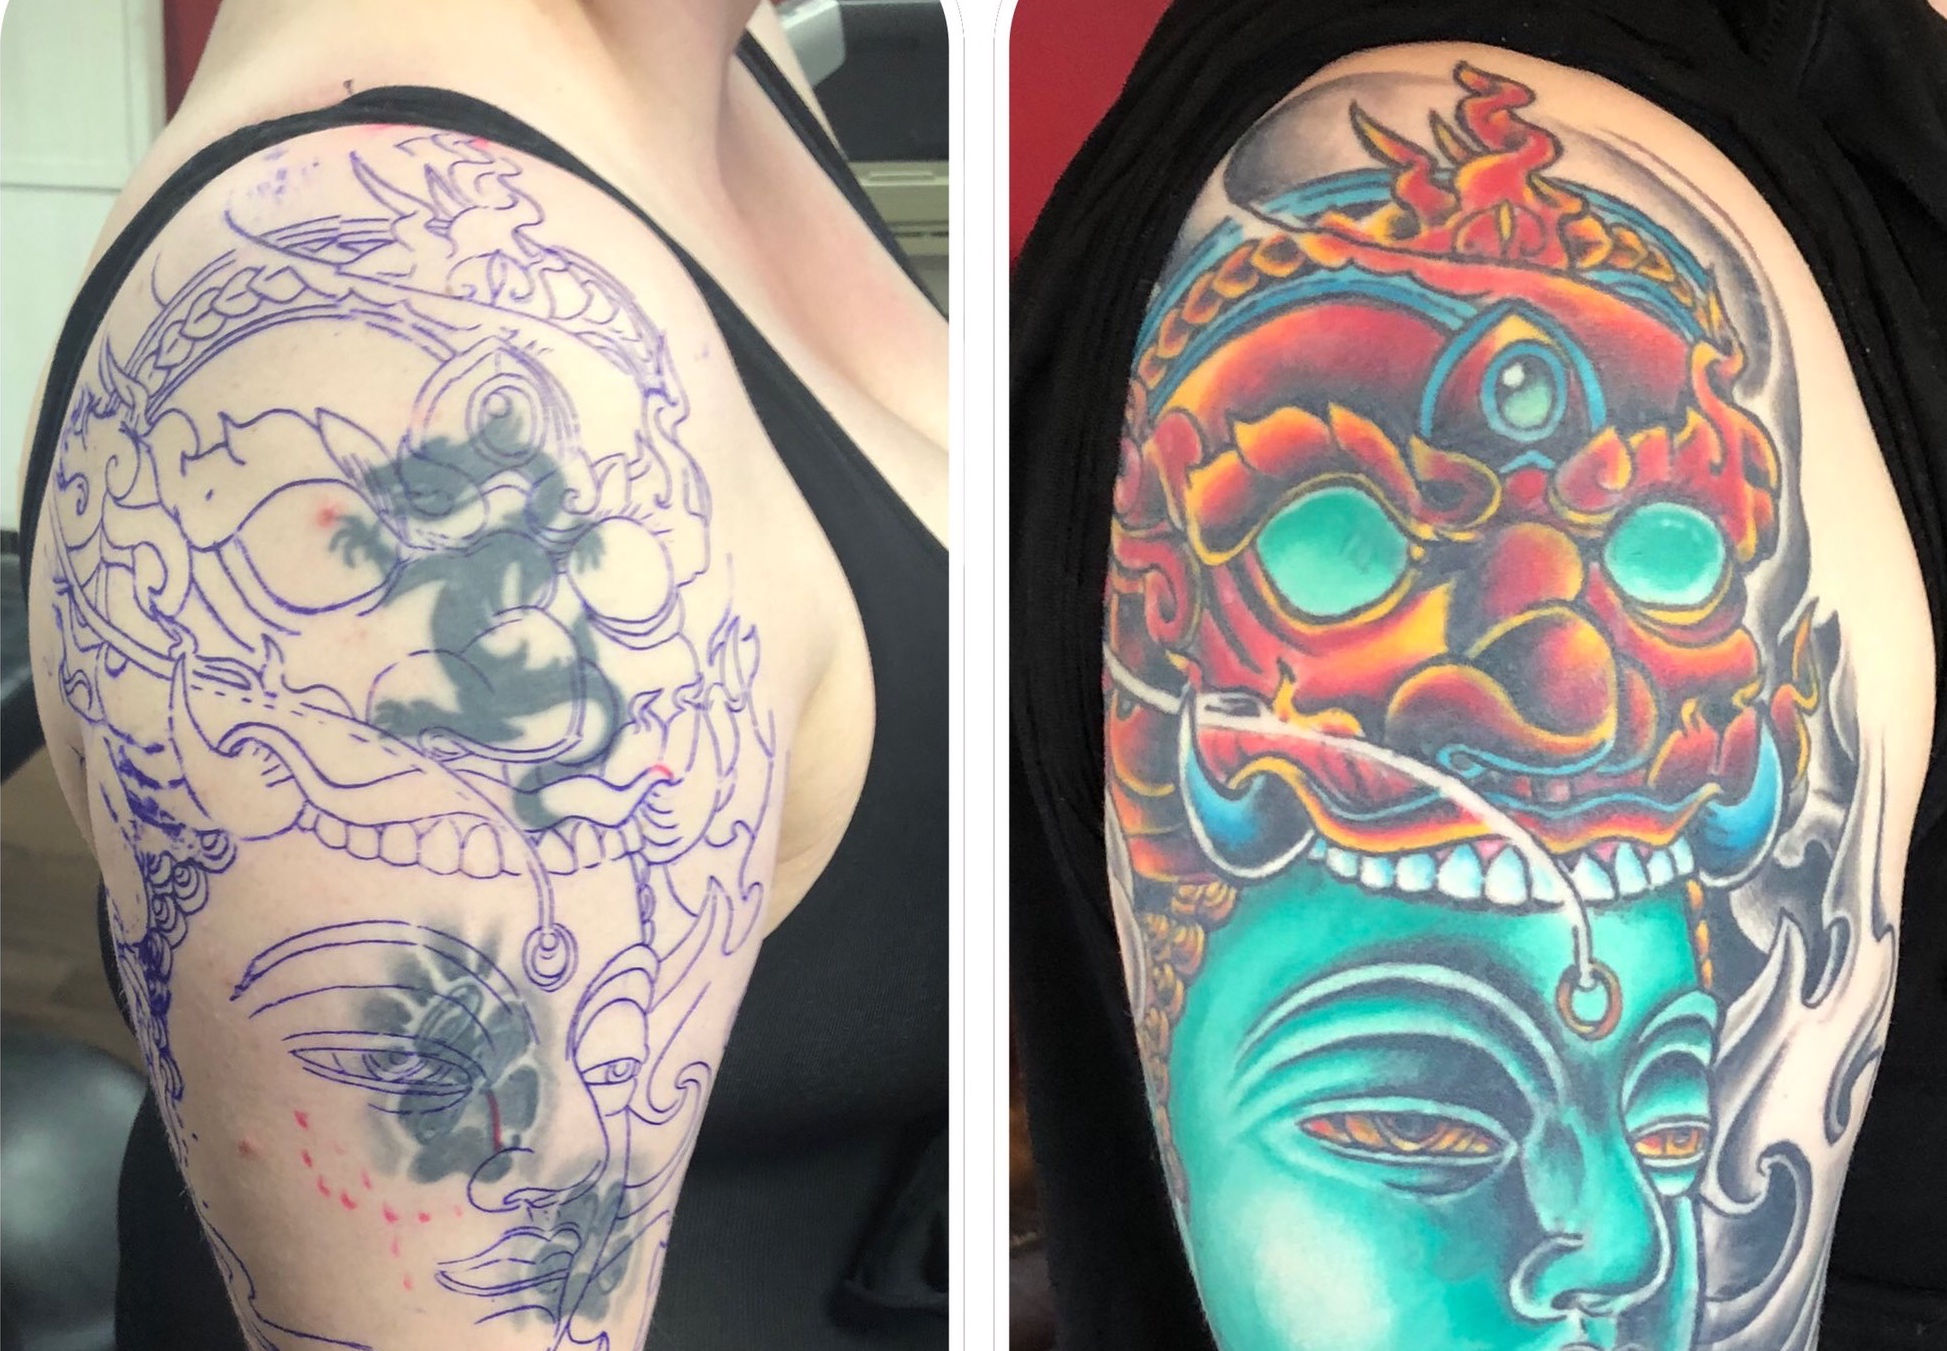 Agency Tattoo  Black octopus has a coverup or two Lewy  Facebook